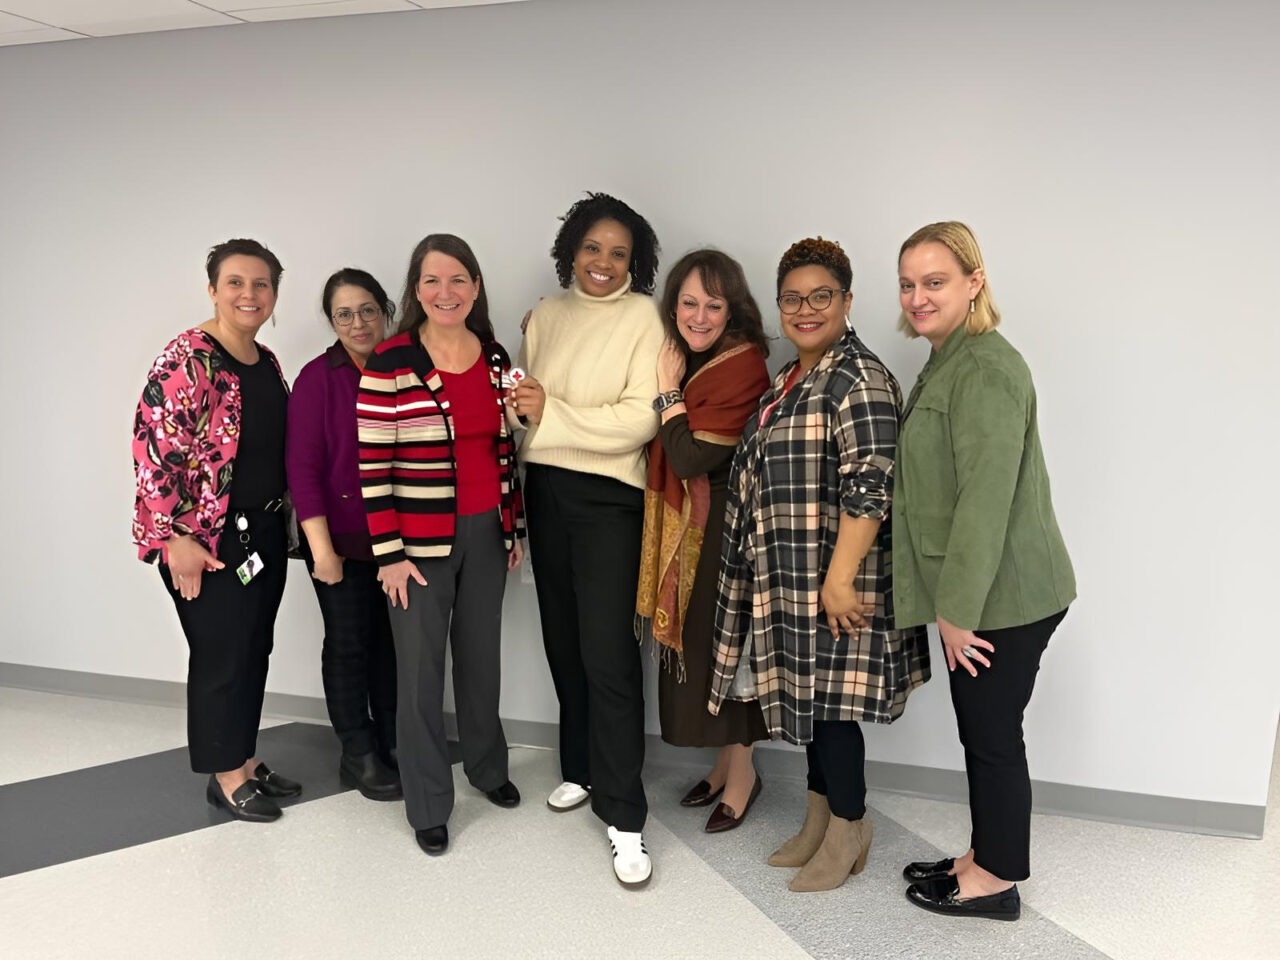 Cecelia Calhoun welcomed members of the American Red Cross Connecticut Chapter to Smilow Cancer Hospital – Yale Cancer Center